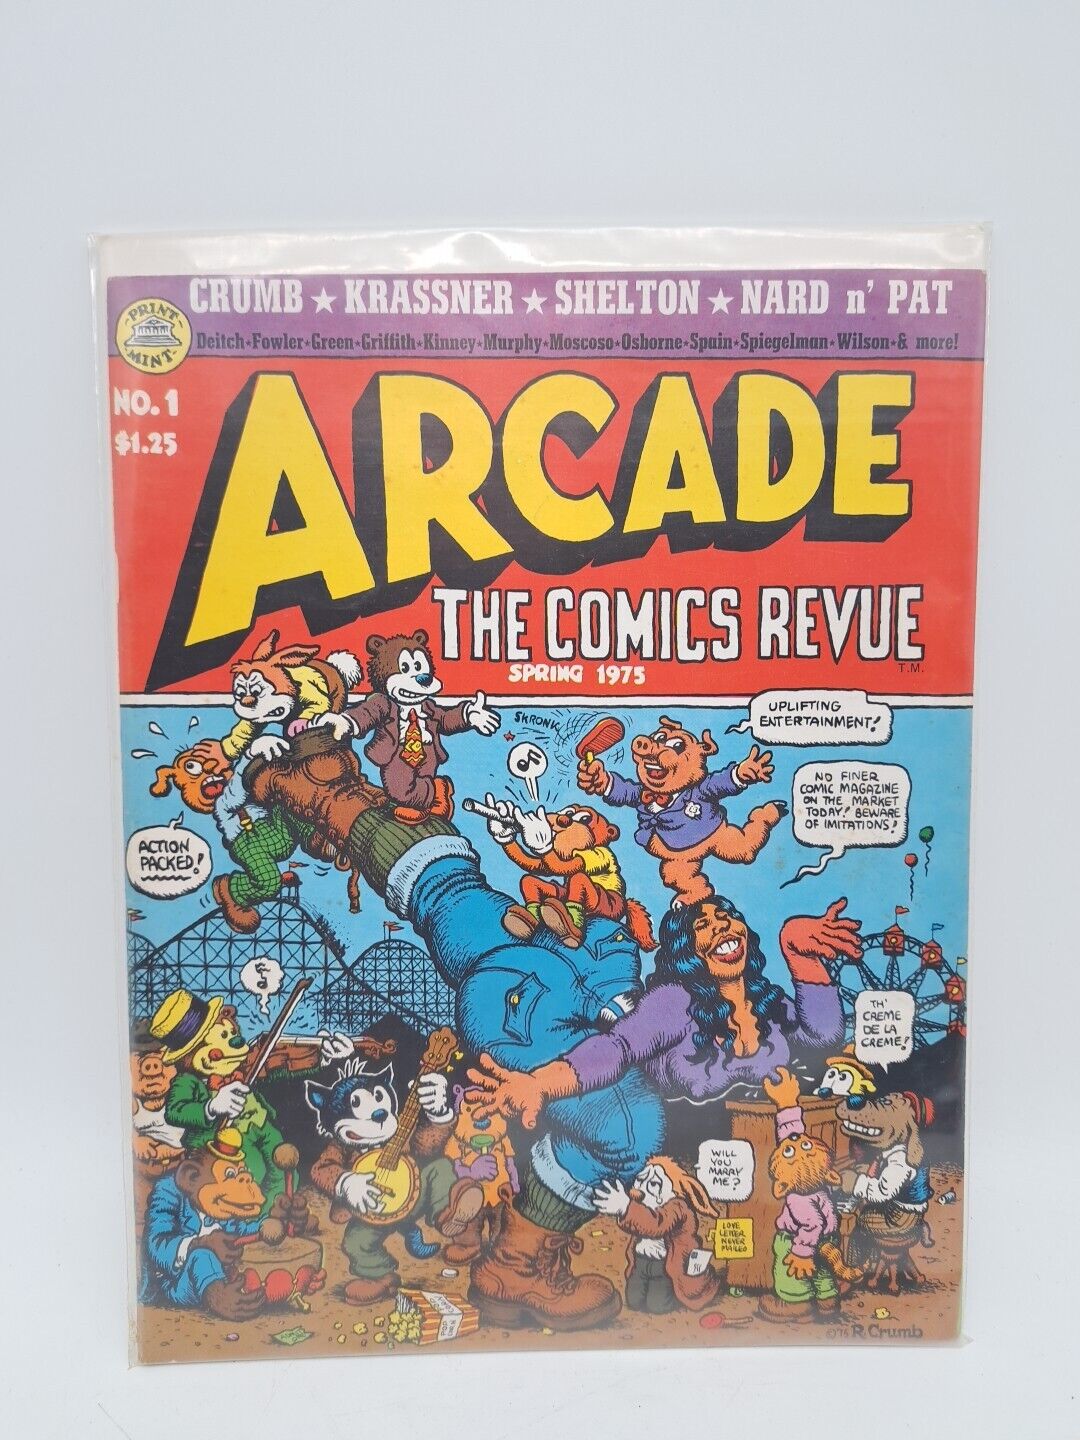 1975 ARCADE COMIC REVIEW #1 VF+ Gilbert Shelton R CRUMB Print Mint Boarded Seal